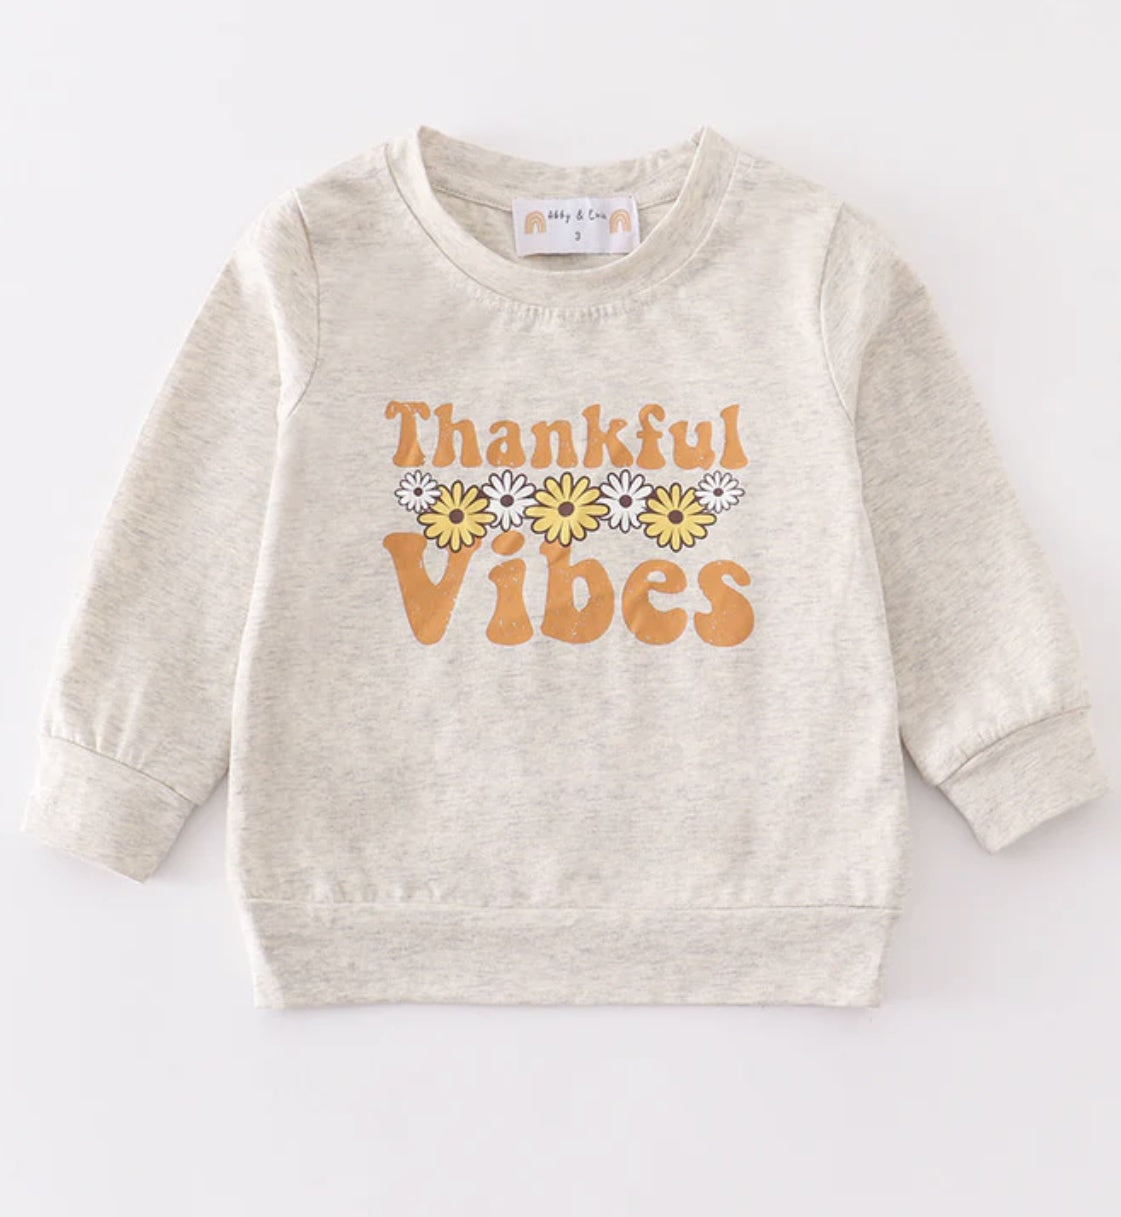 Thankful Vibes Top